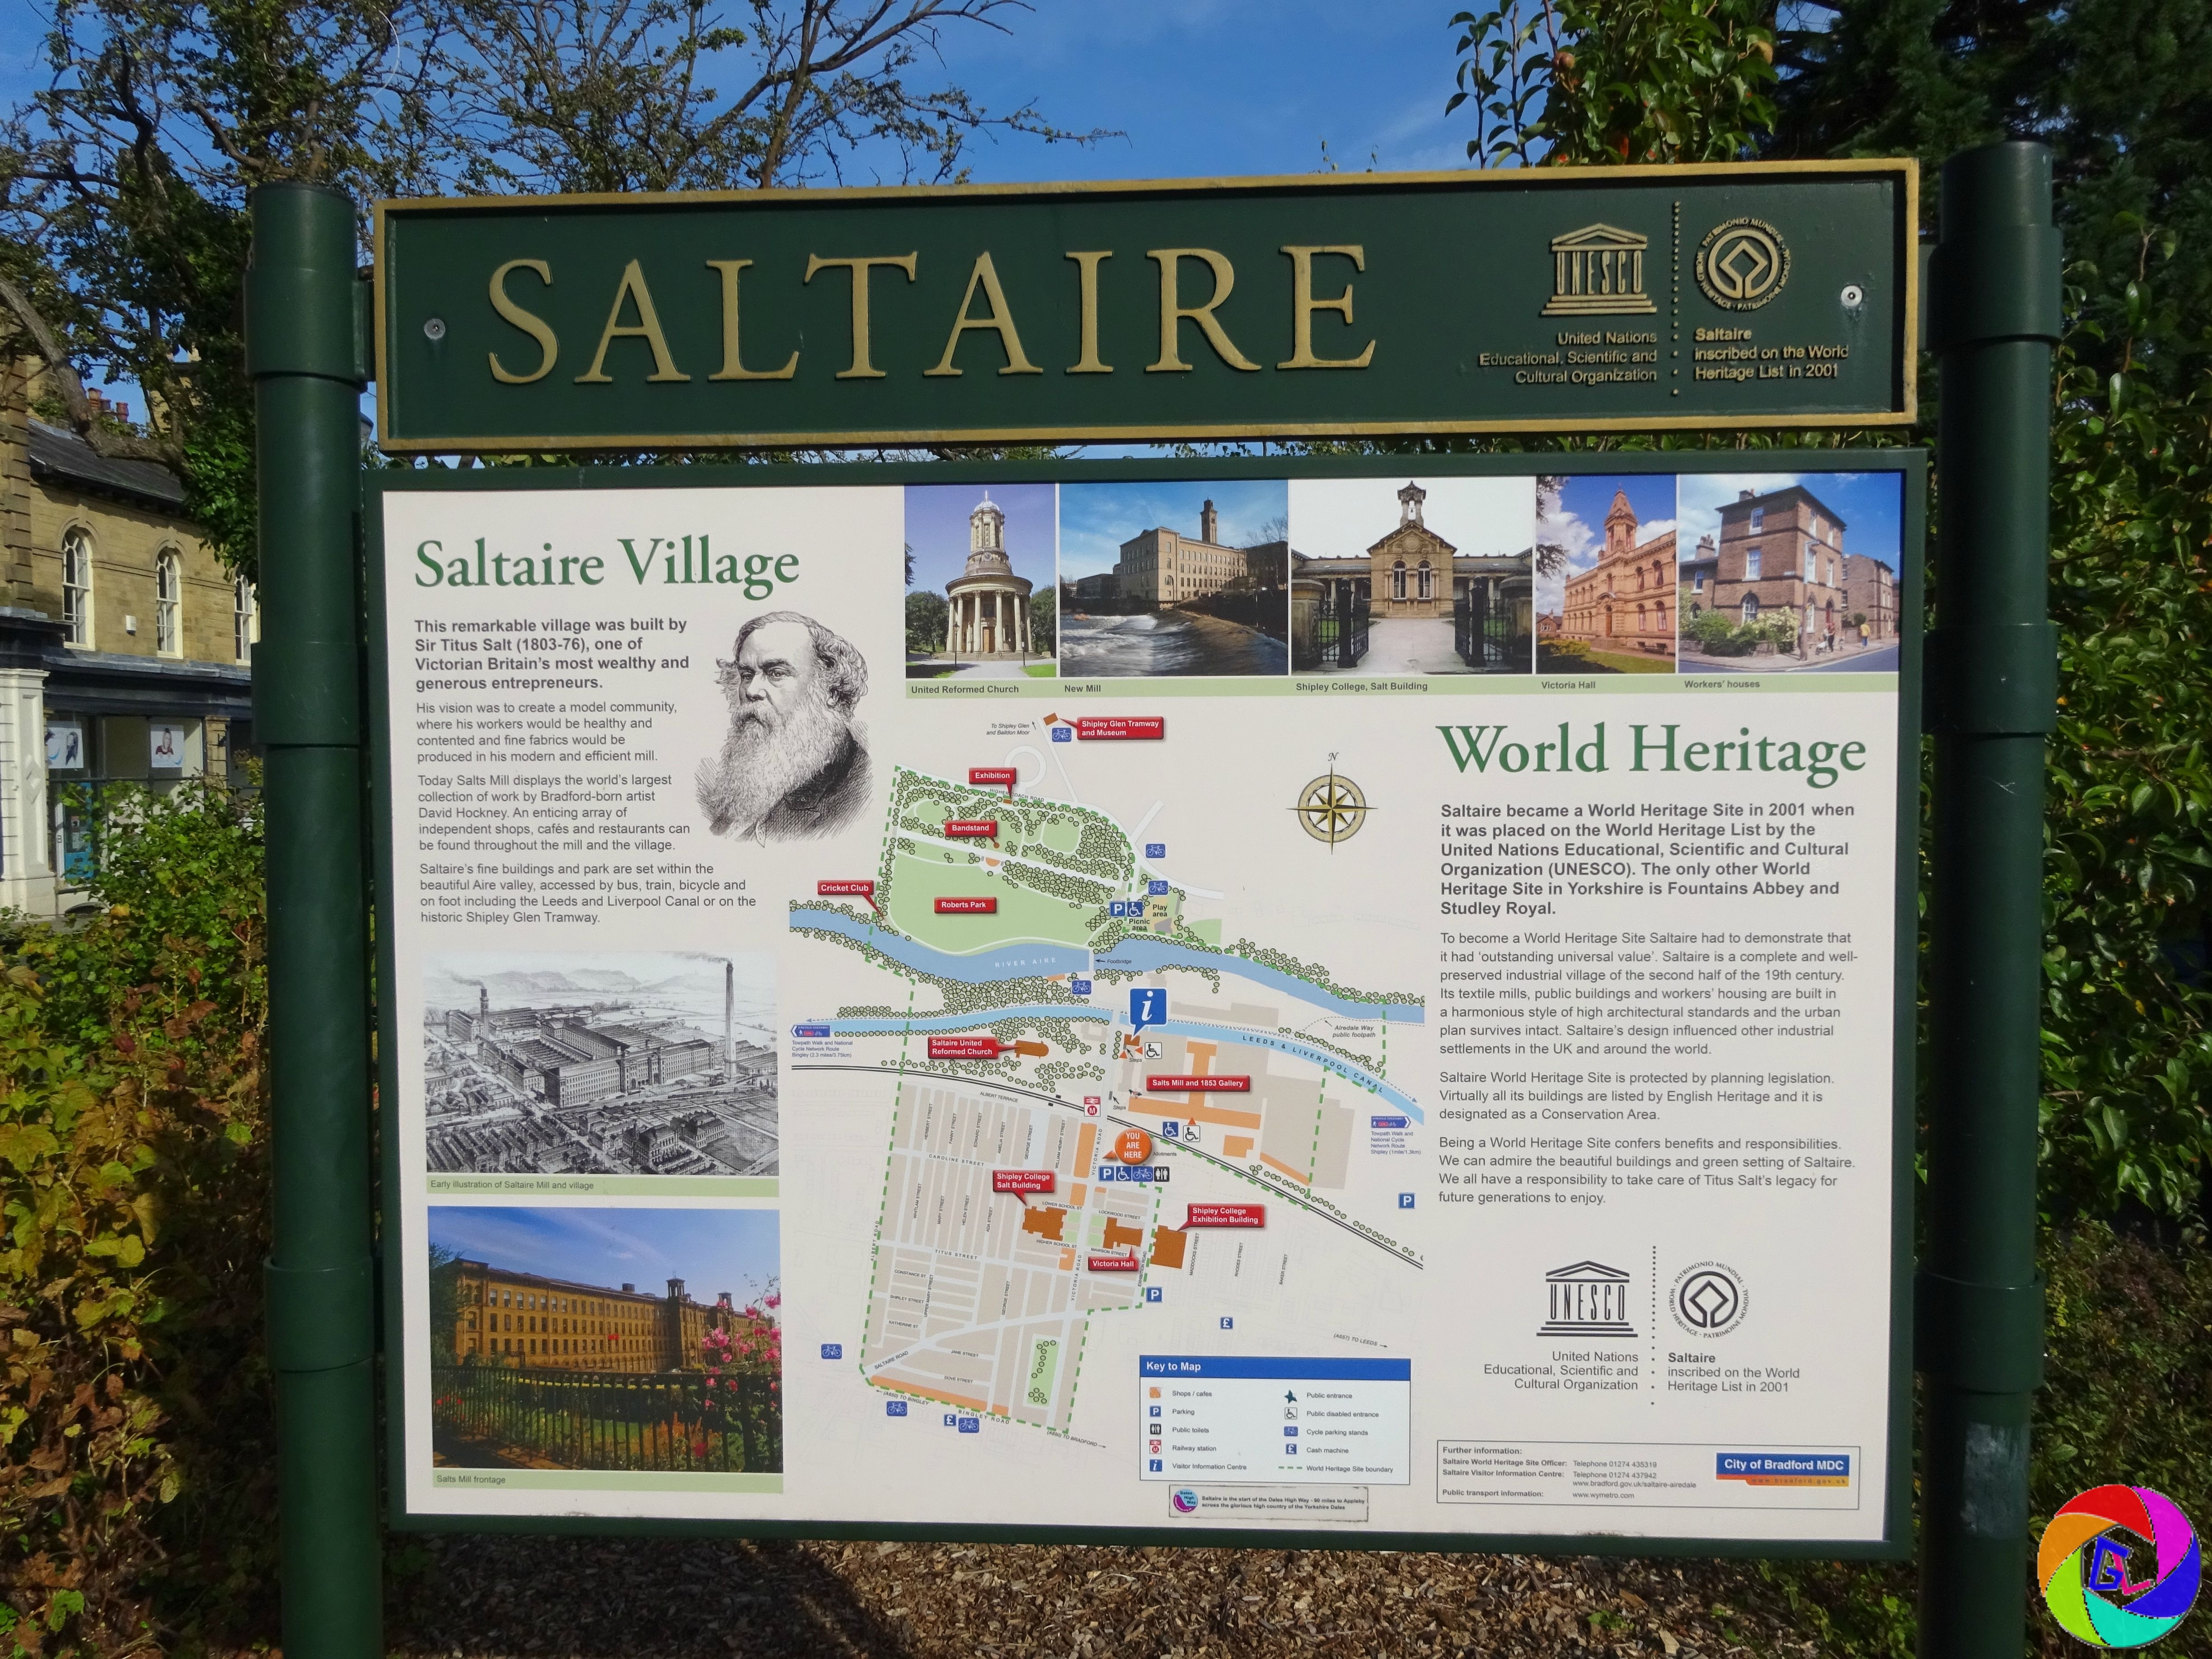 World Heritage Site, village founded by Titus Salt for his mill and workers